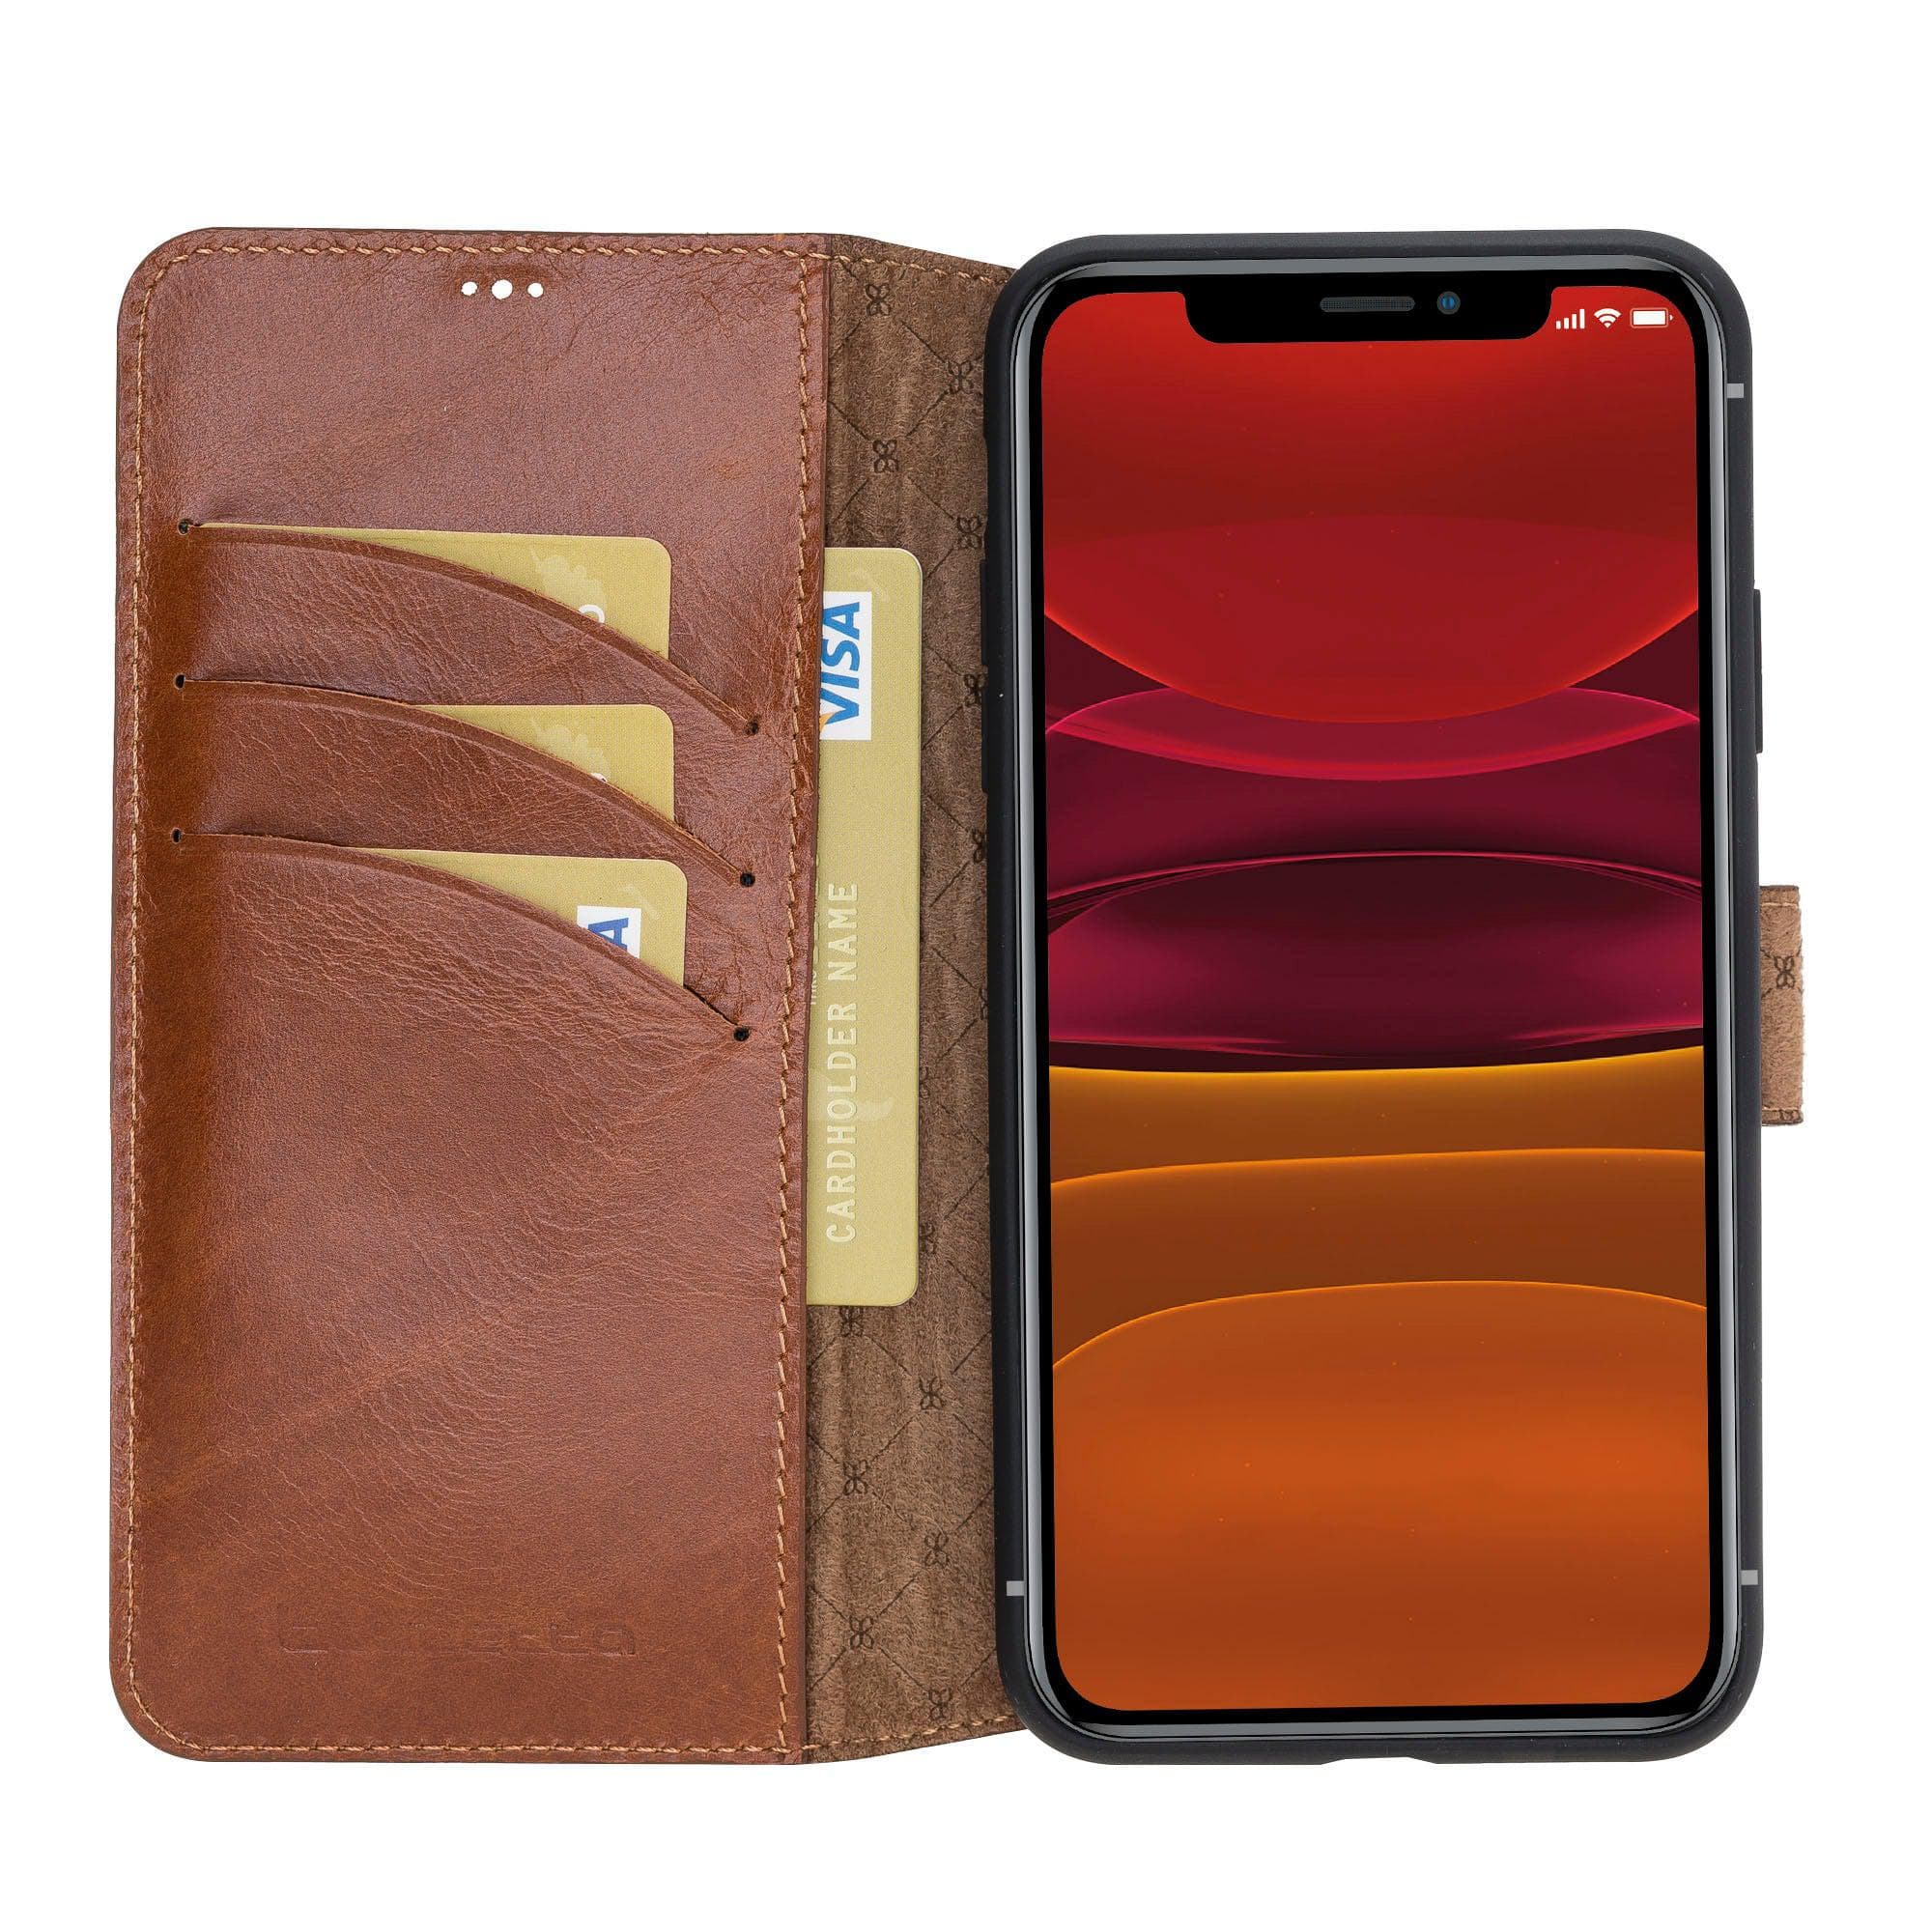 Wallet Folio with ID Slot Leather Wallet Case For Apple iPhone 11 Series İPhone 11 / Tan Bouletta LTD